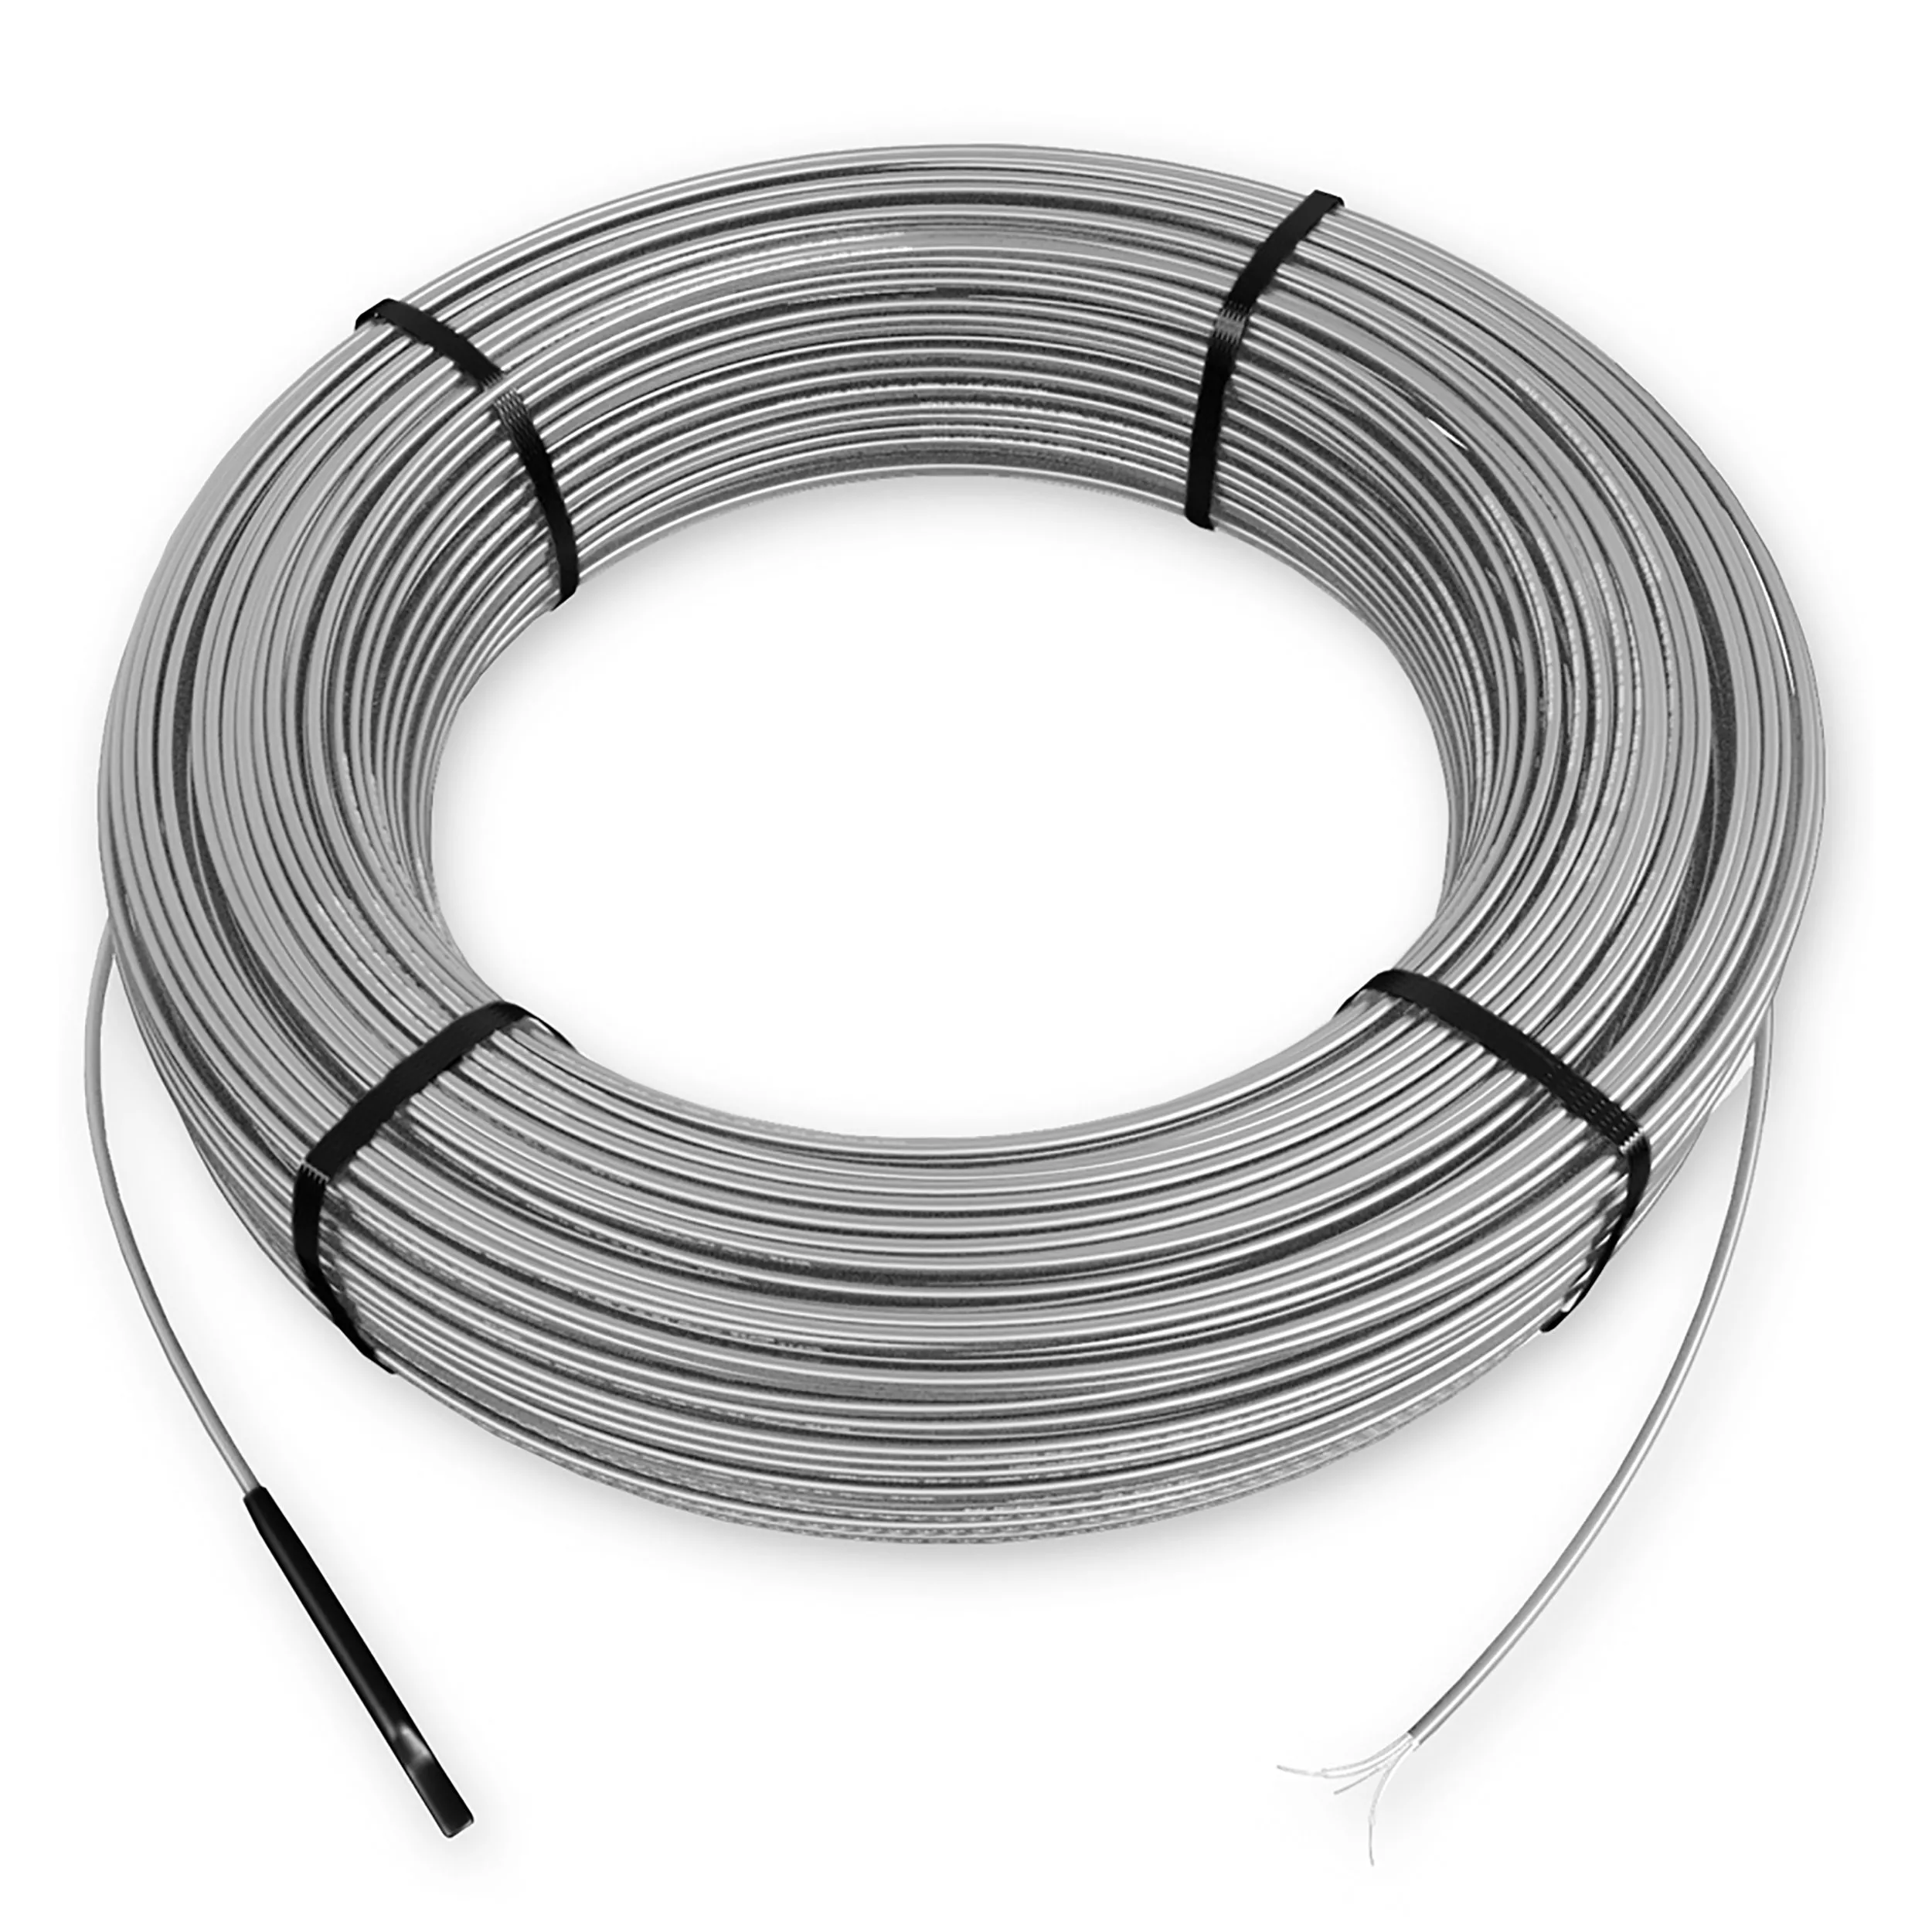 Schluter 32sqft. Ditra Heat 120V Heating Cable